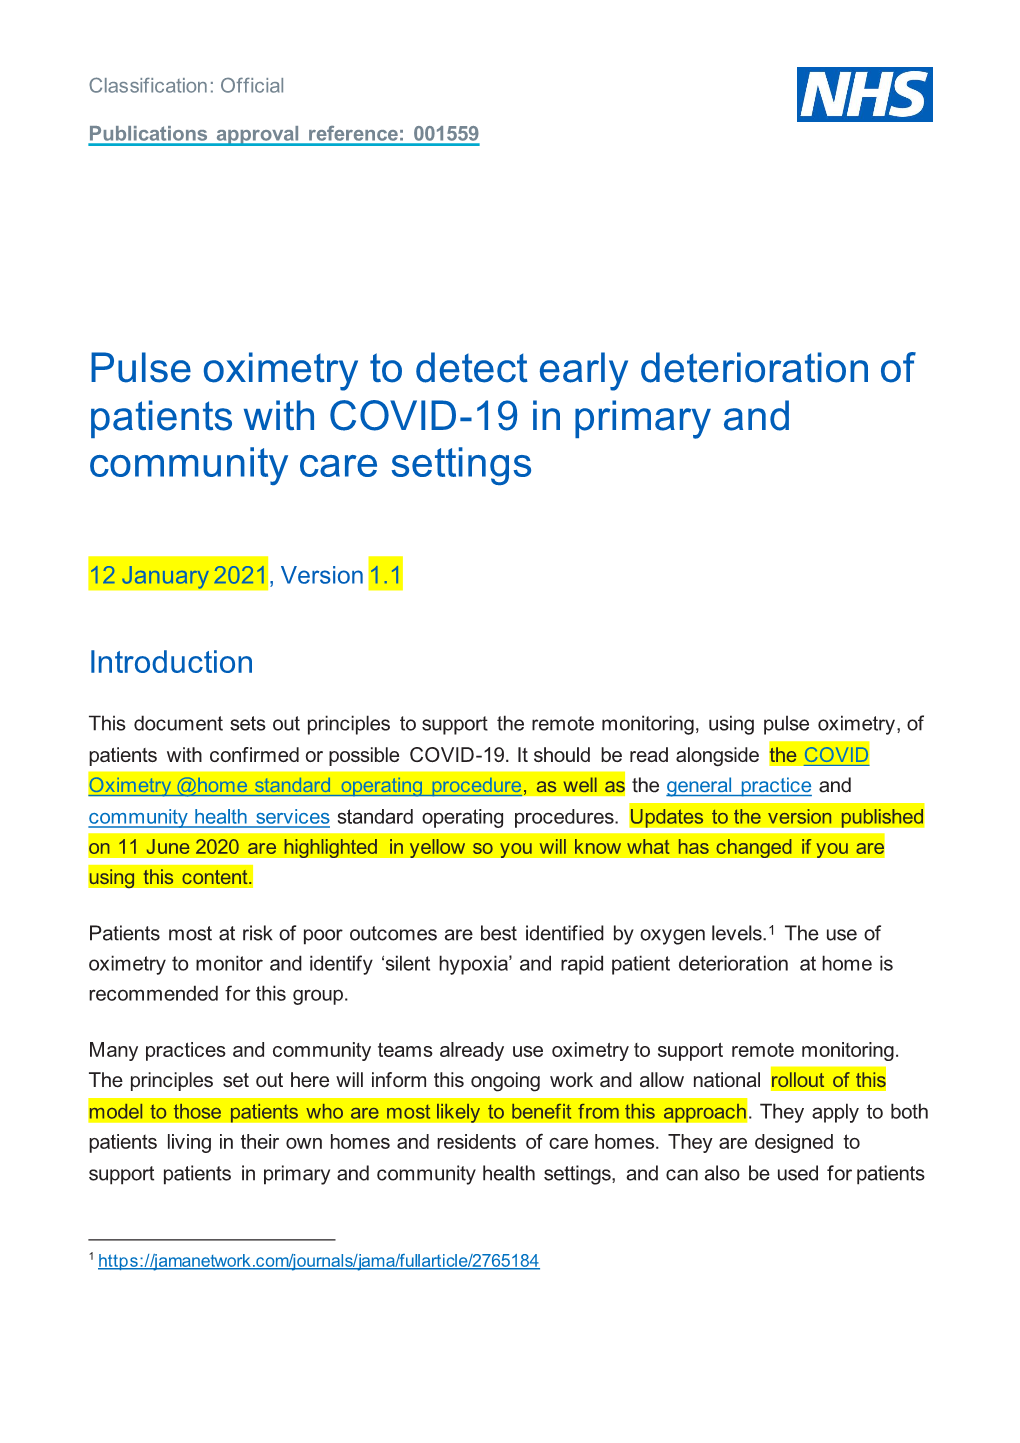 Pulse Oximetry to Detect Early Deterioration of Patients with COVID-19 in Primary and Community Care Settings